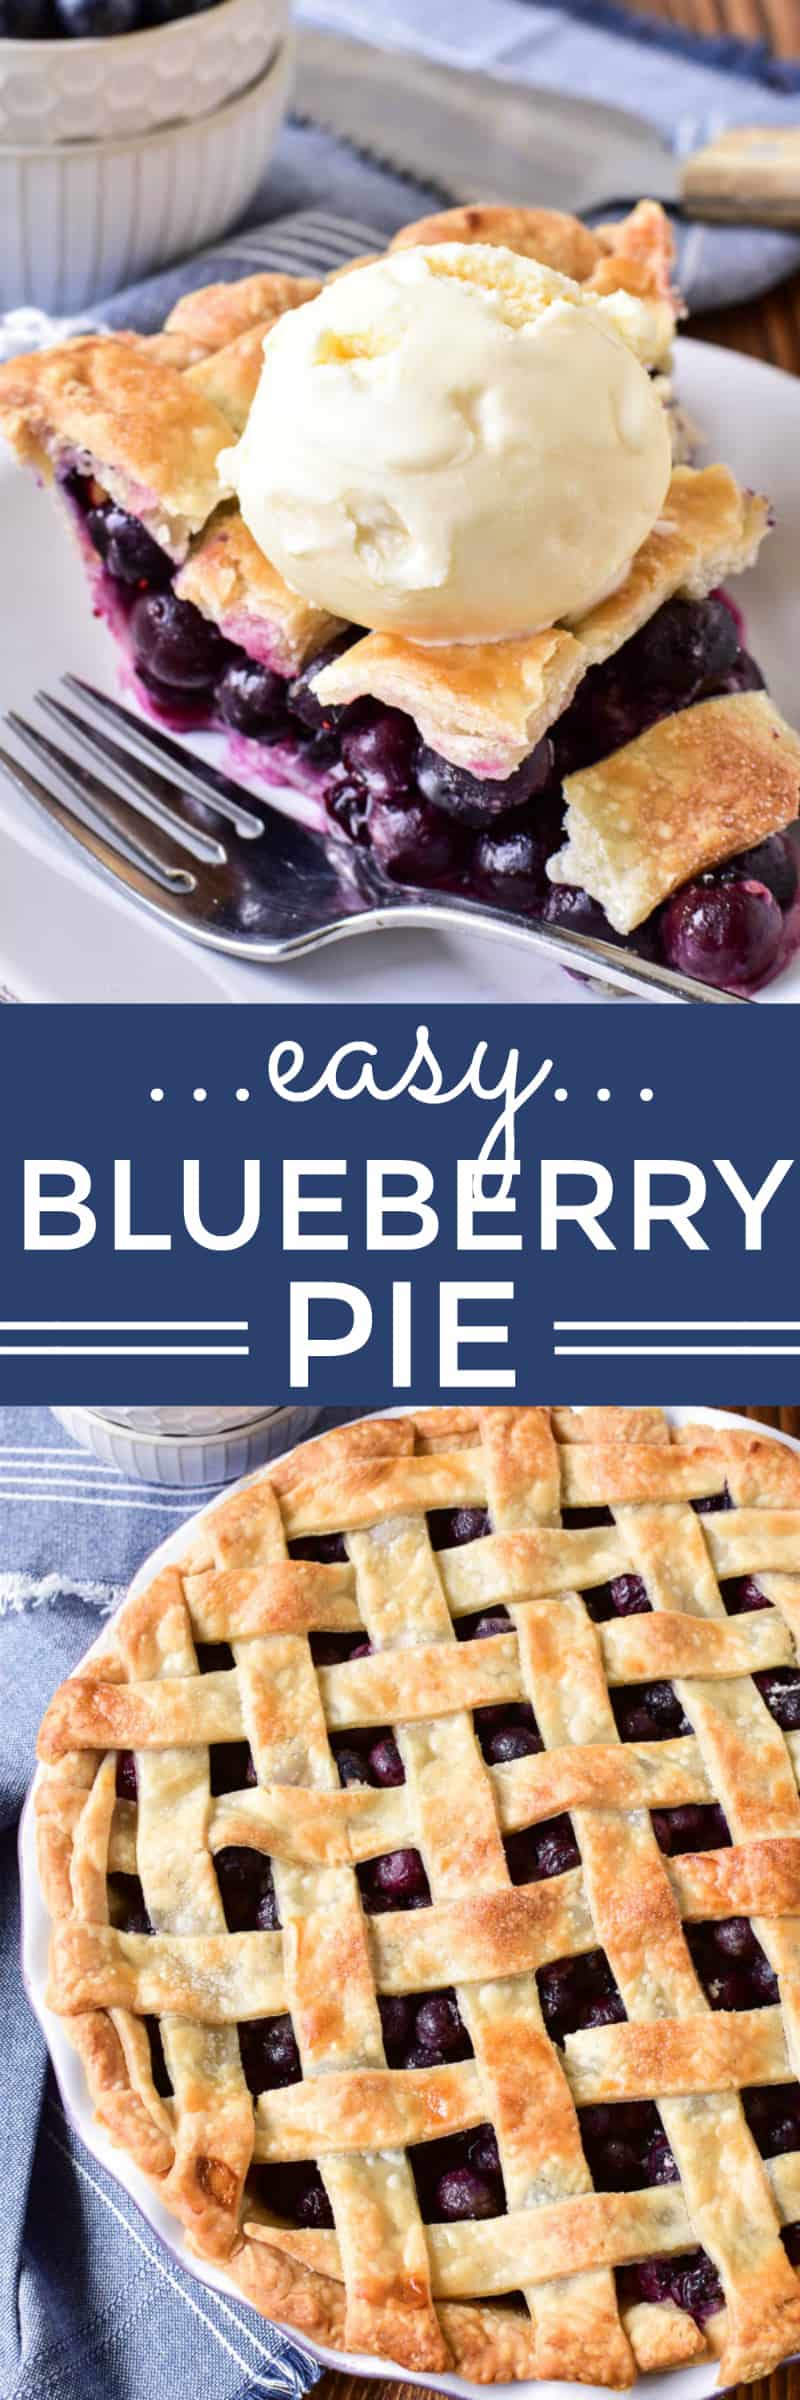 This Easy Blueberry Pie is one of our favorite summer desserts! It's simple to make, with just a handful of ingredients, and packed with the sweet taste of fresh blueberries. This pie is perfect for summer picnics or parties, and it comes together in no time at all. You can serve it as is, straight from the pan, or with a scoop of vanilla ice cream for a summer treat that's sure to be a hit!